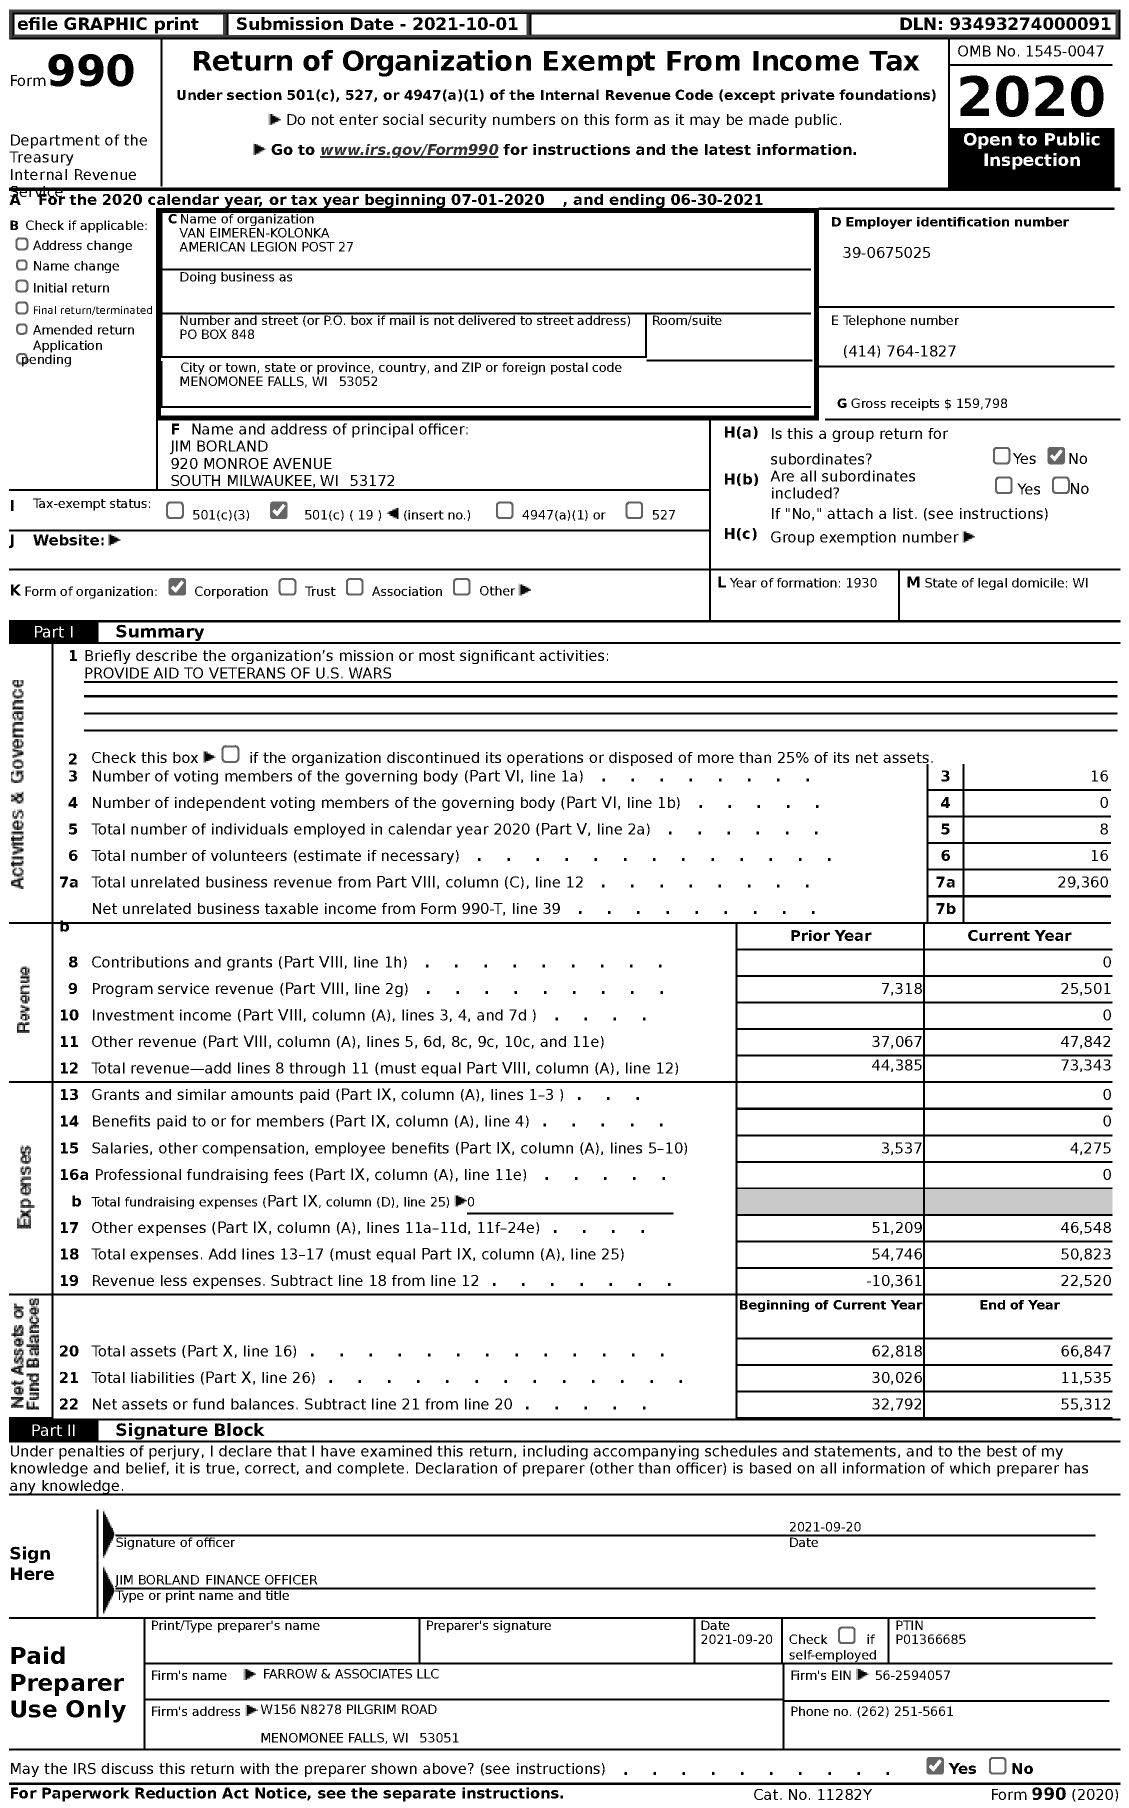 Image of first page of 2020 Form 990 for American Legion - Van Eimeren-Kolonka American Legion Post 27